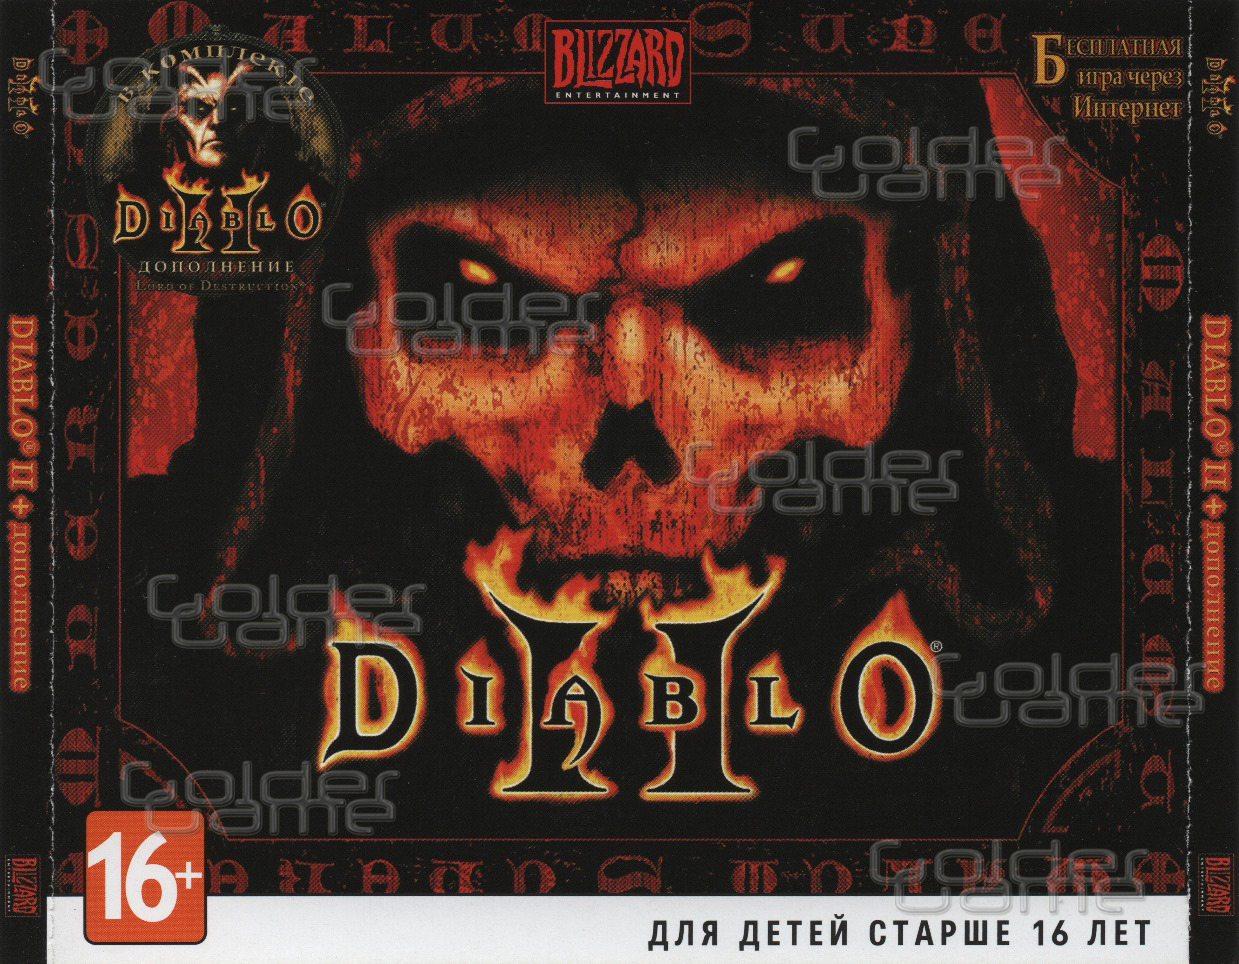 where to find your blizzard diablo 2 cd keys